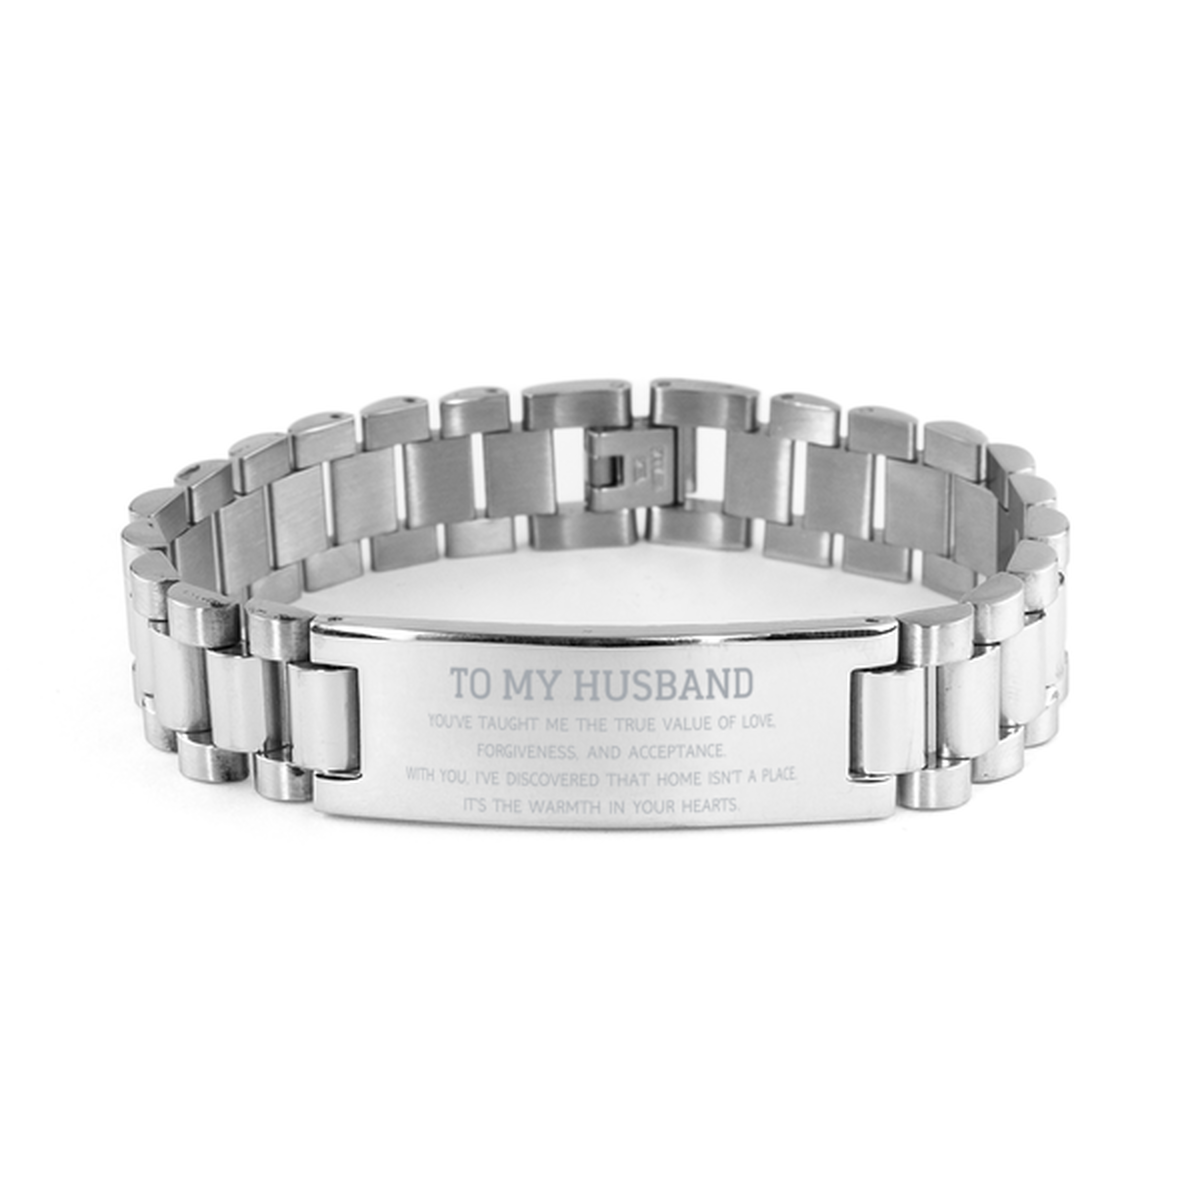 To My Husband Gifts, You've taught me the true value of love, Thank You Gifts For Husband, Birthday Ladder Stainless Steel Bracelet For Husband